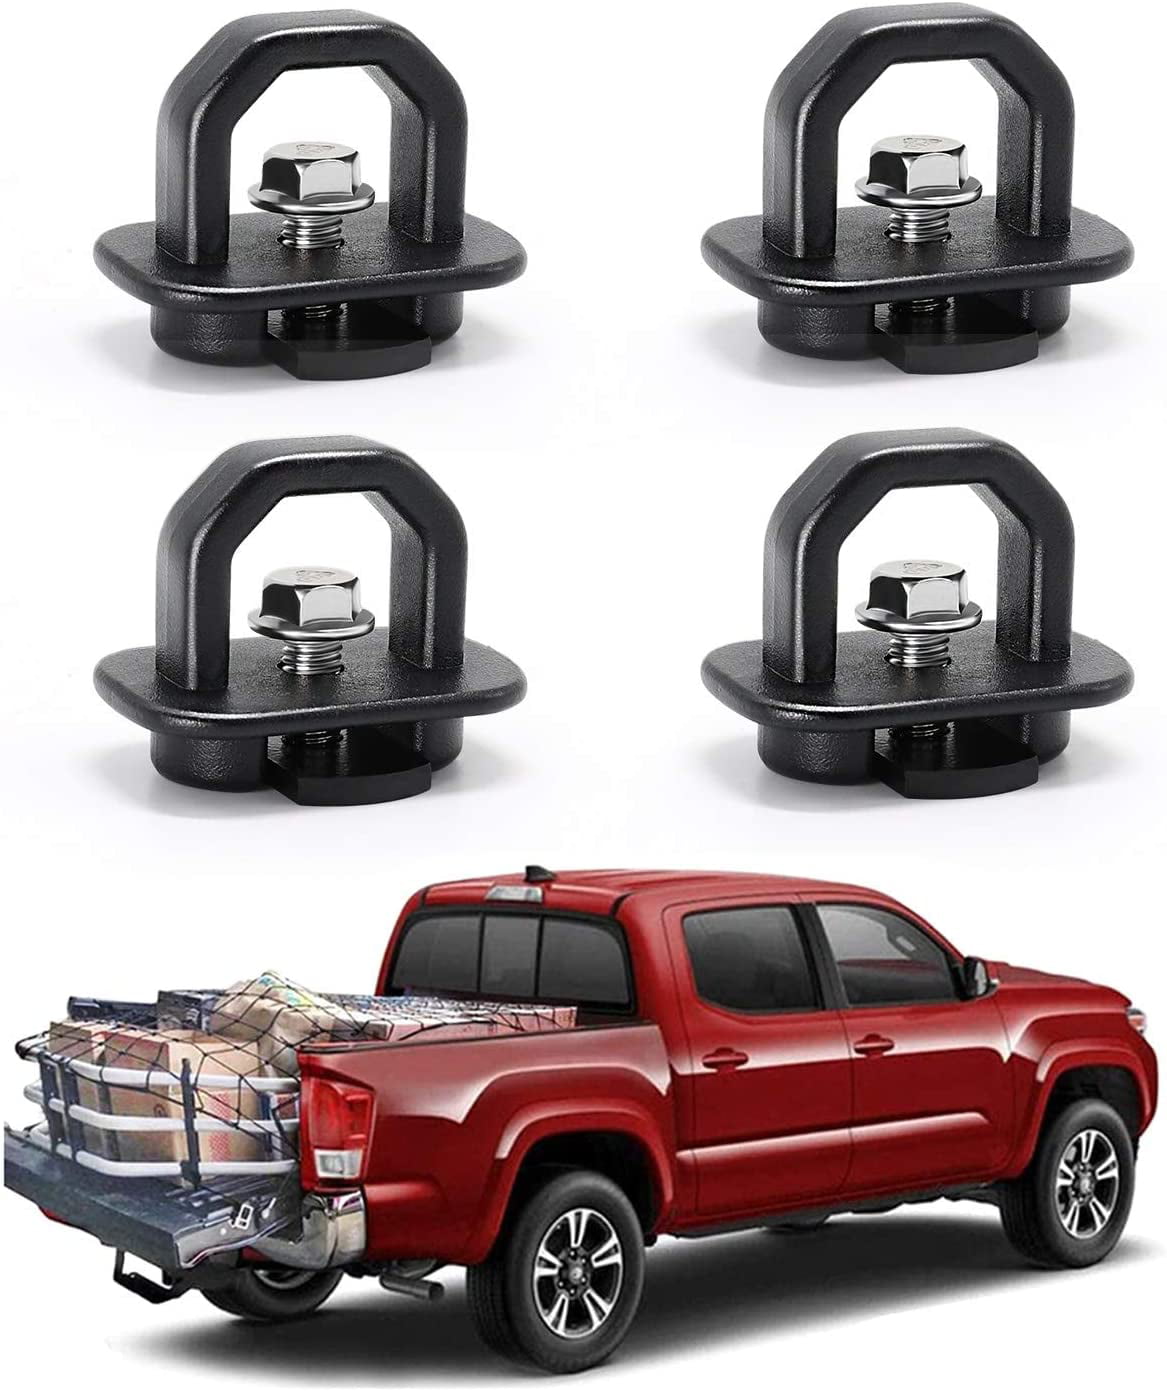 SUZCO 2-Pack Anchor Truck Bed Stake Pockets Set Side Wall Tie Downs Cargo Anchor Fits 07-19 Chevy Silverado I 07-19 GMC Sierra I 07-19 Chevy Colorado I 07-19 GMC Canyon 2 Packs 